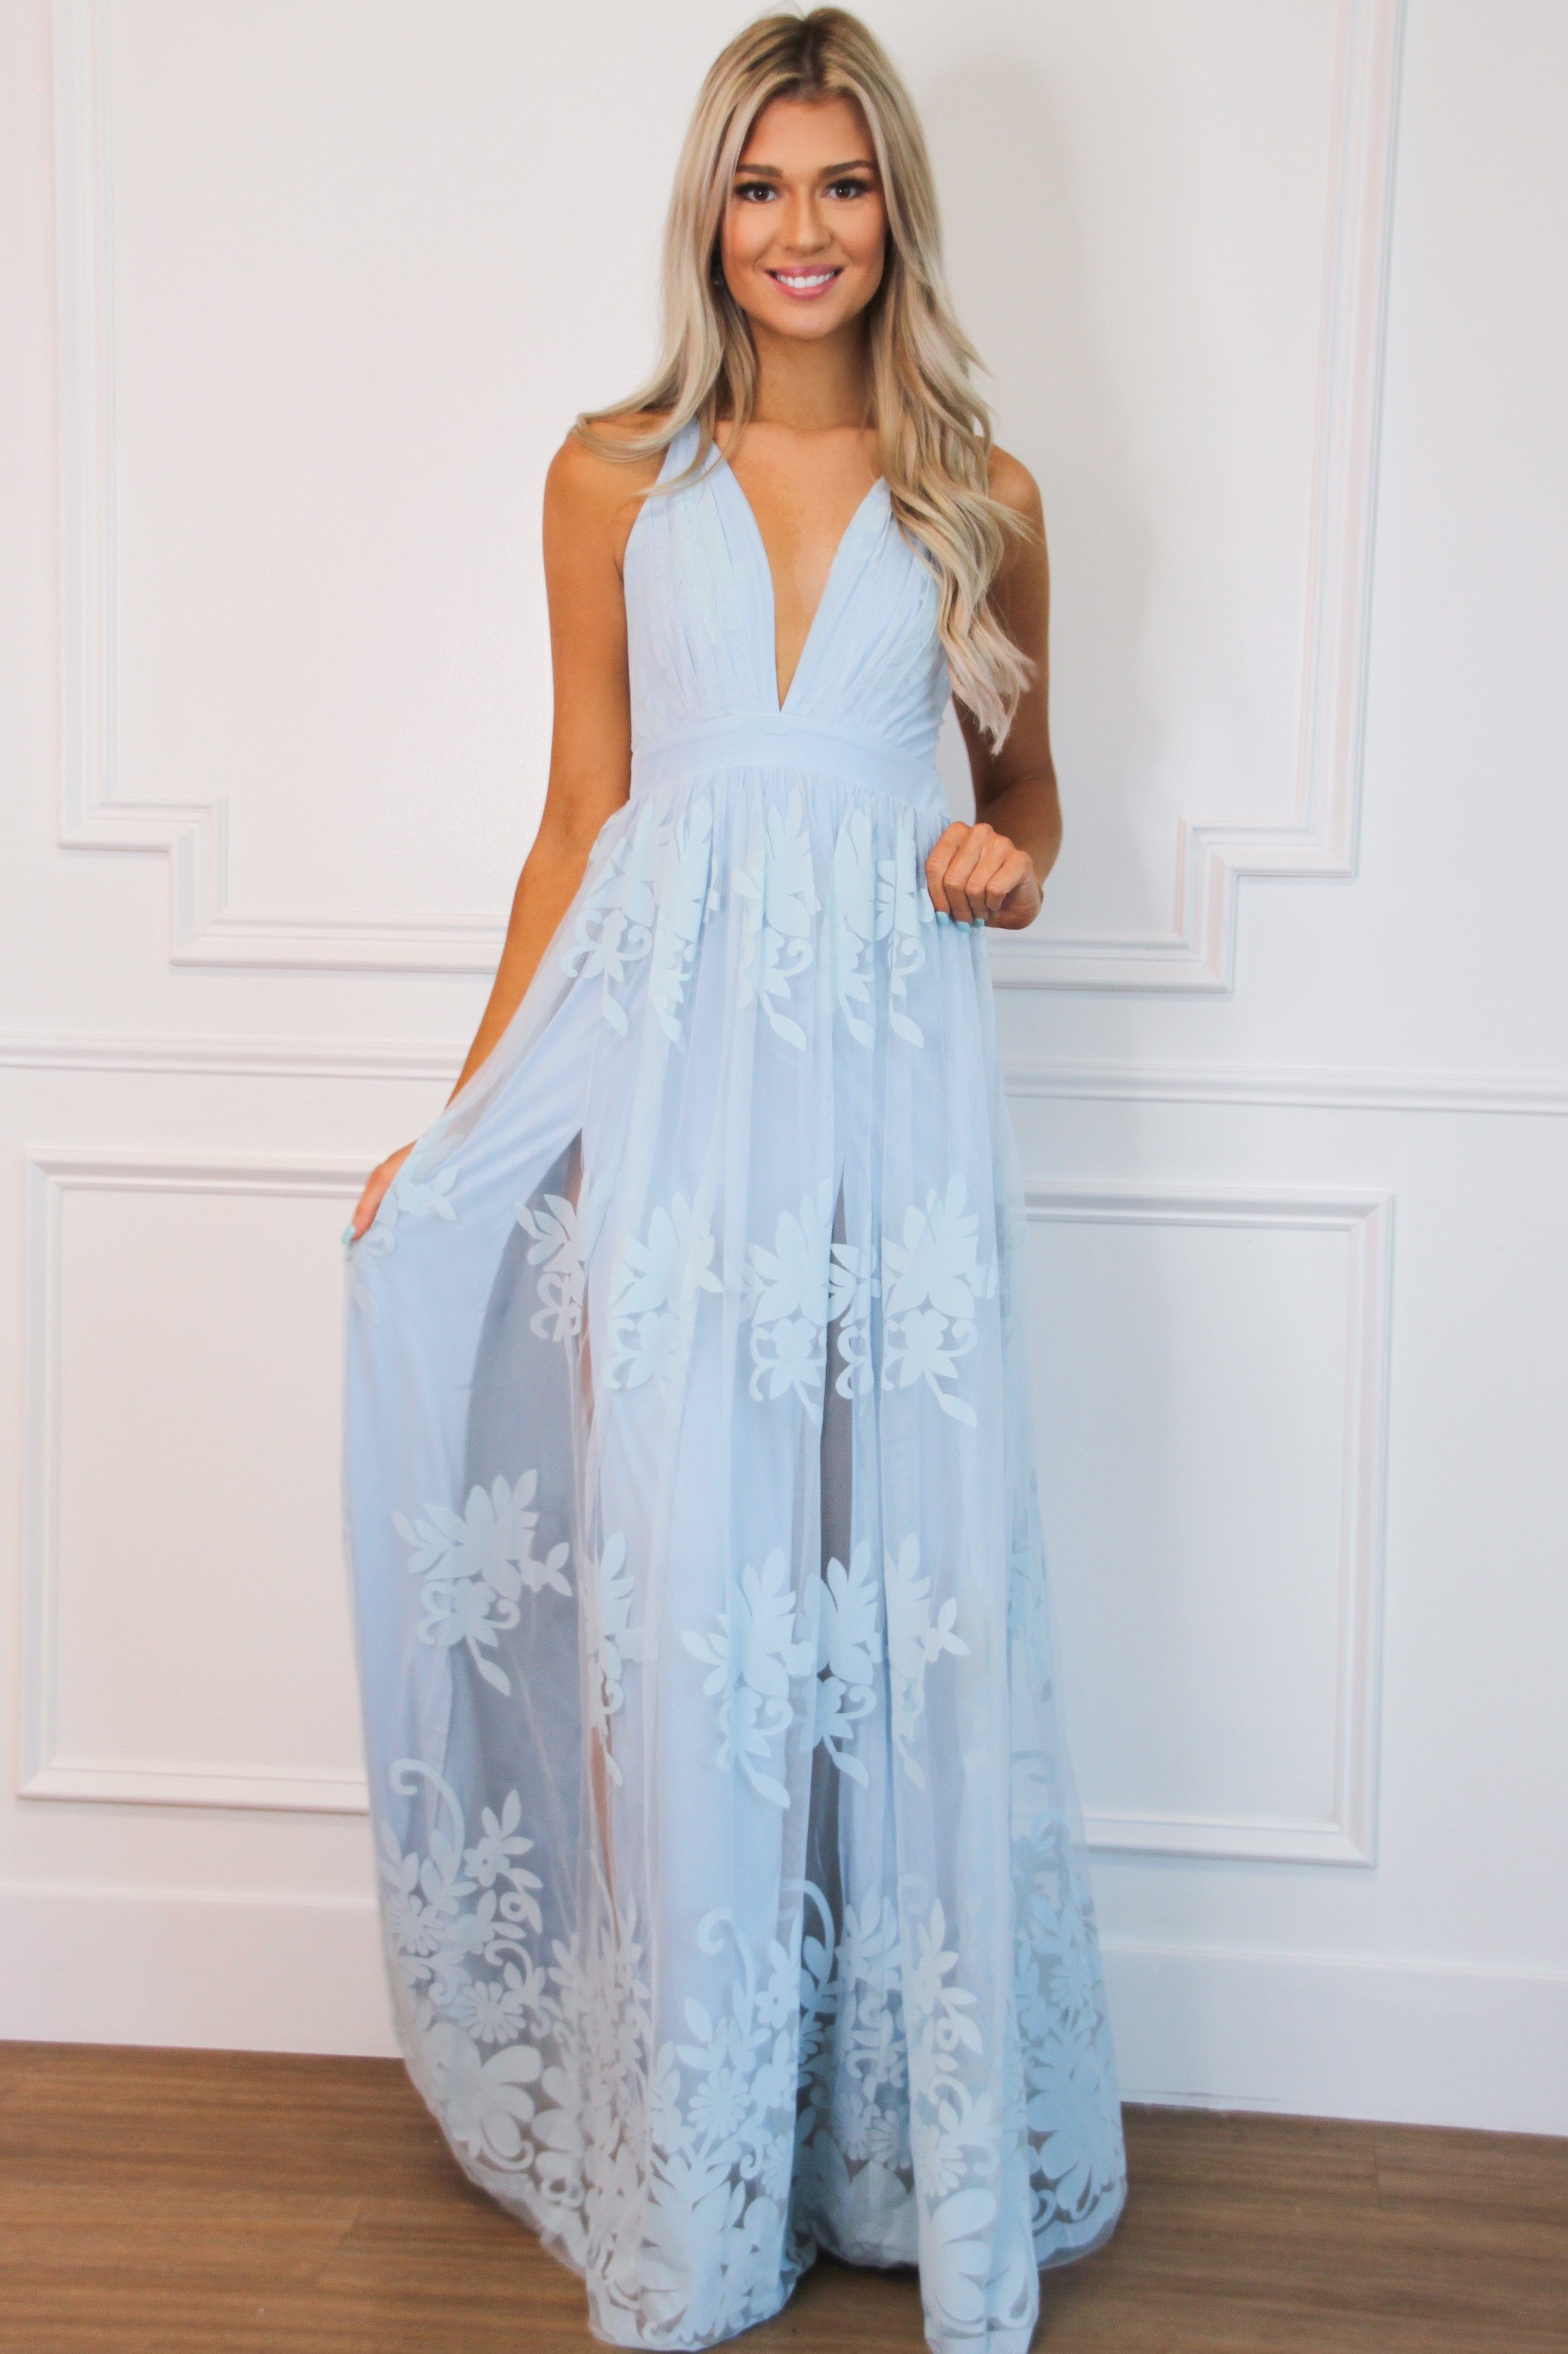 Bella and Bloom Boutique - Here Comes the Bride Maxi Dress: Light Blue